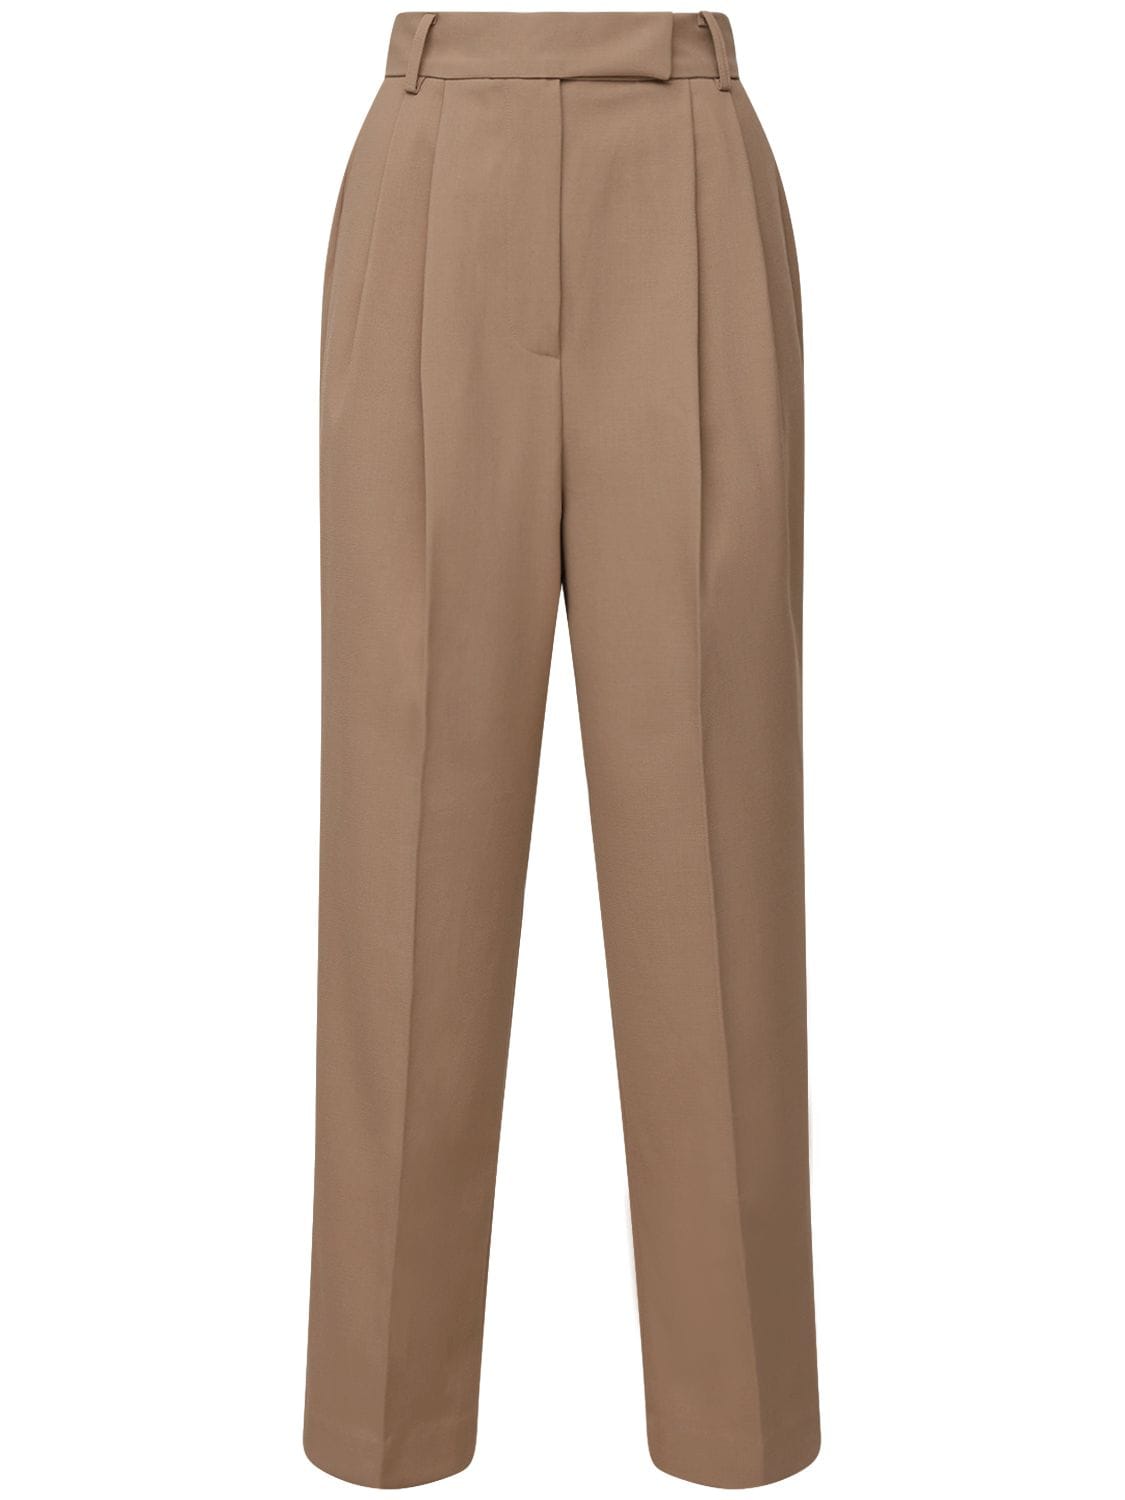 THE FRANKIE SHOP BEA PLEATED TECH TWILL trousers